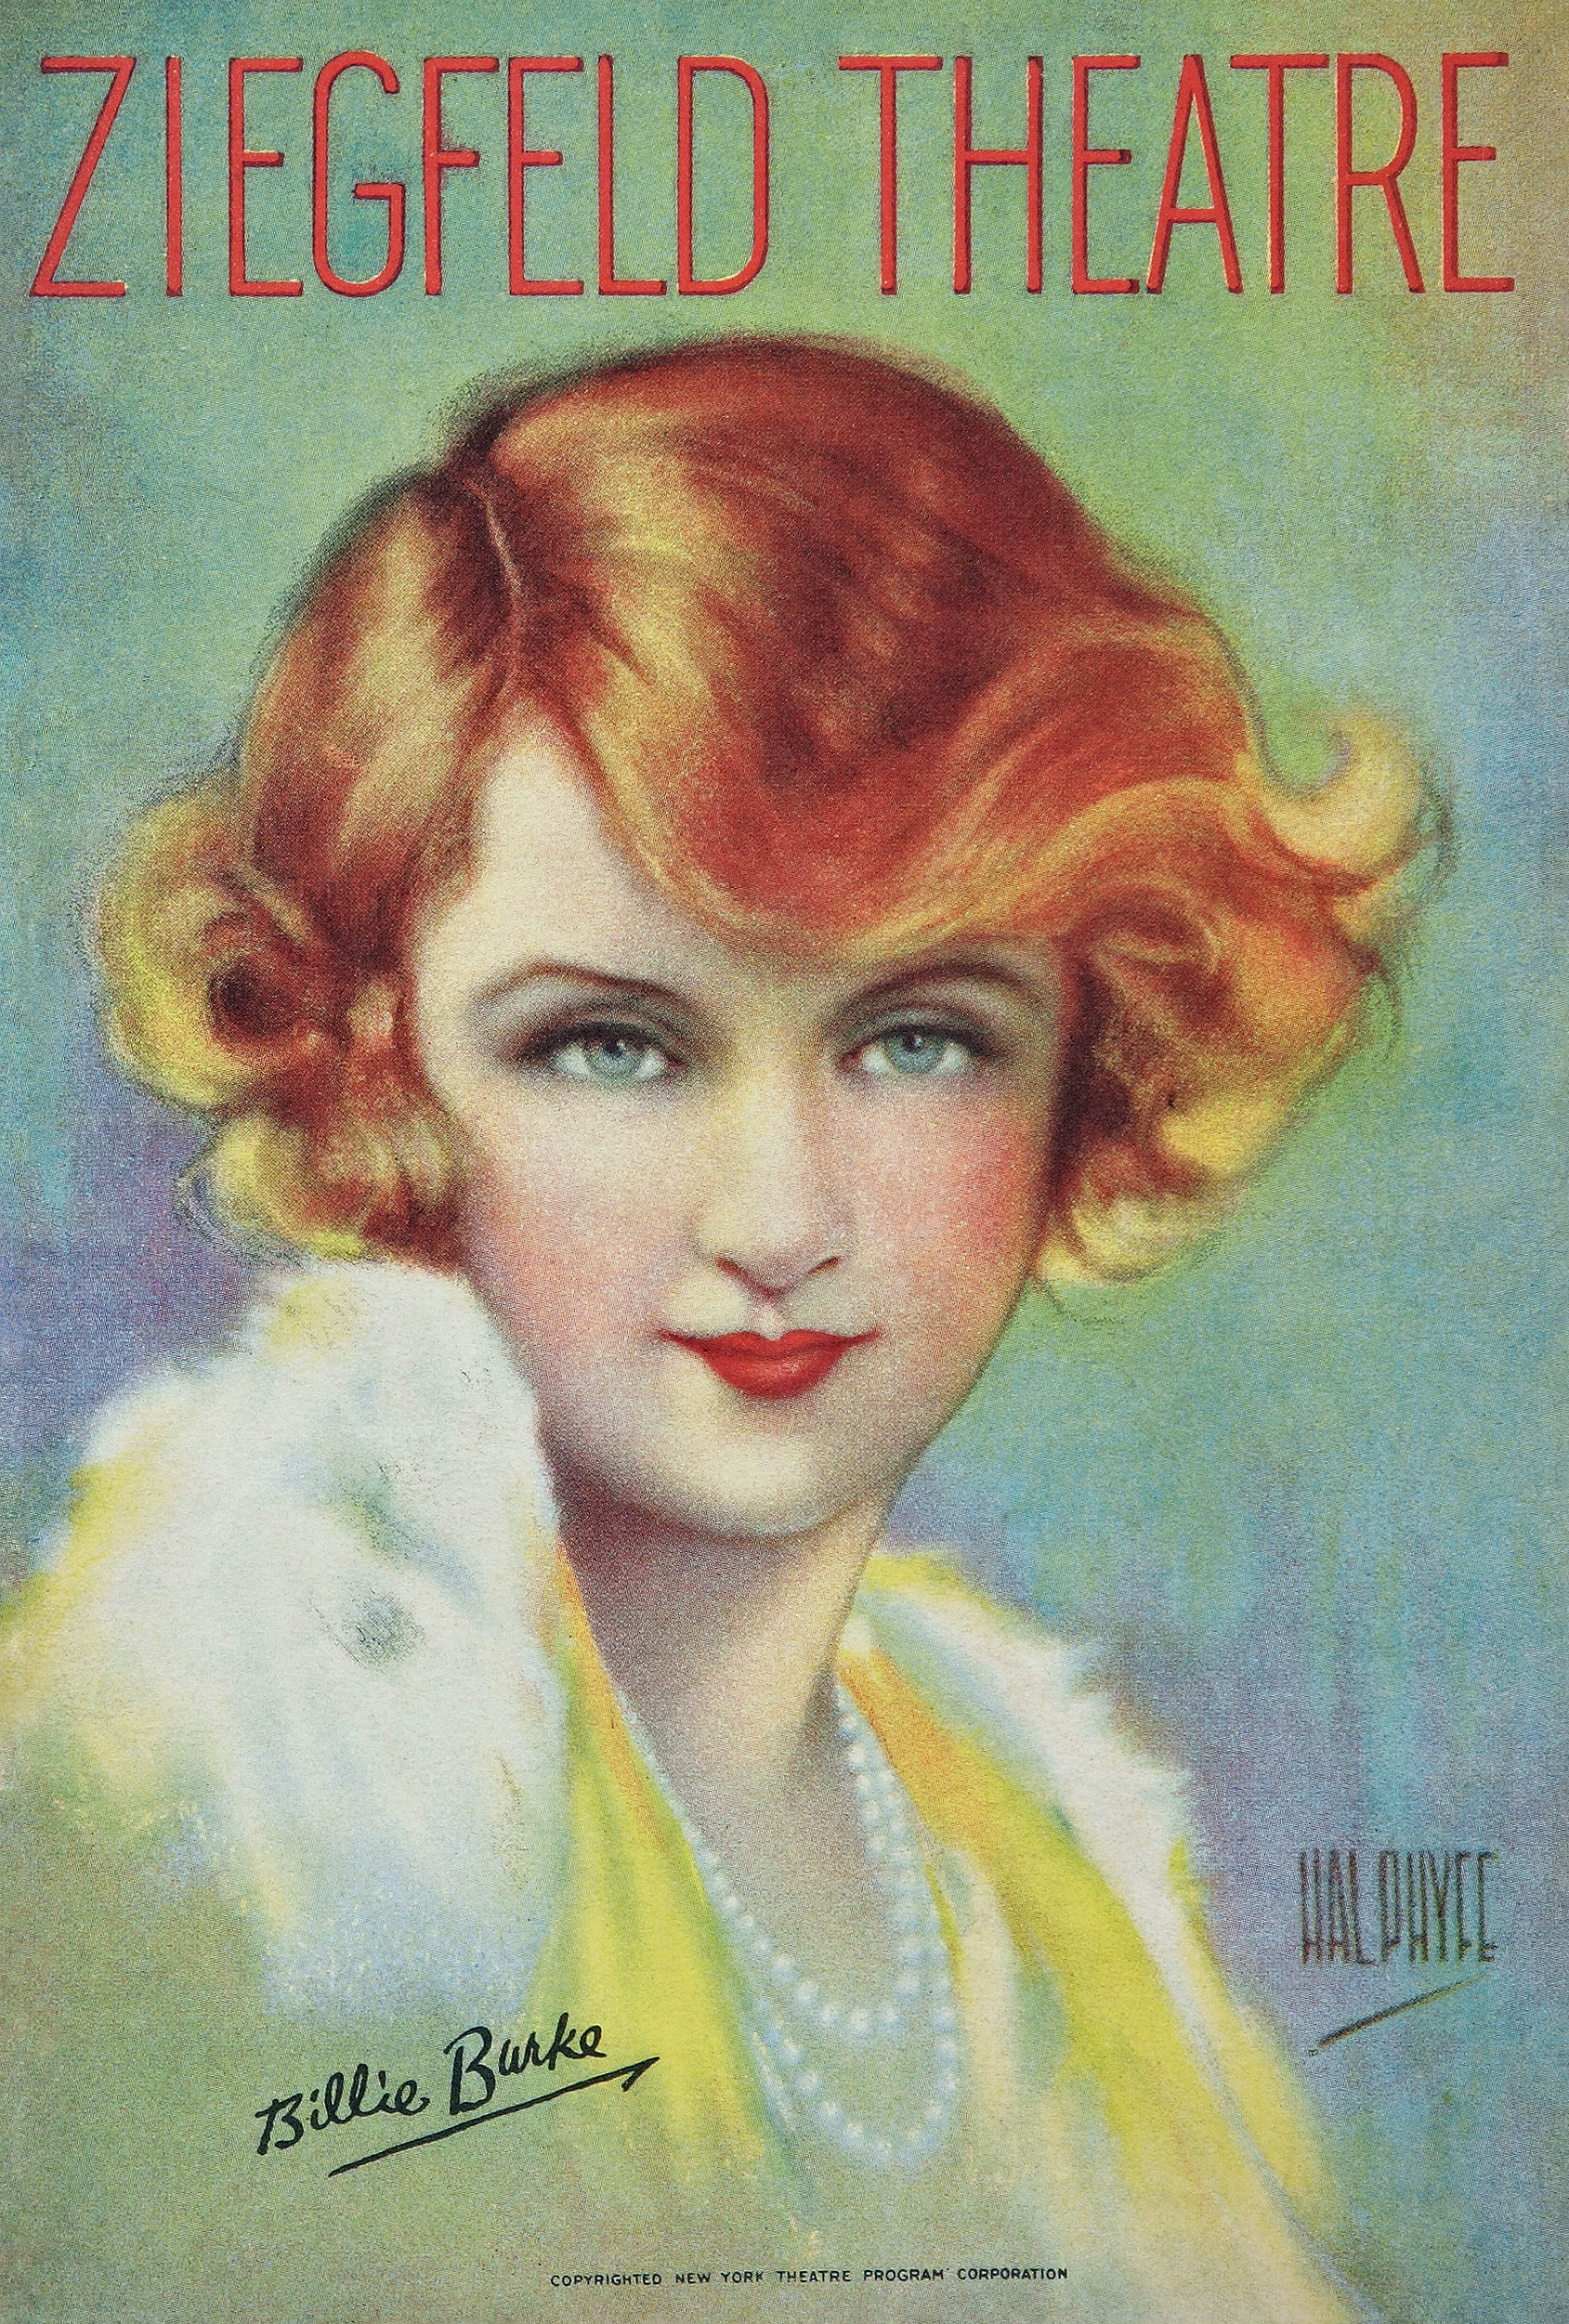 Hollywood, Magazine covers and 1920s on Pinterest